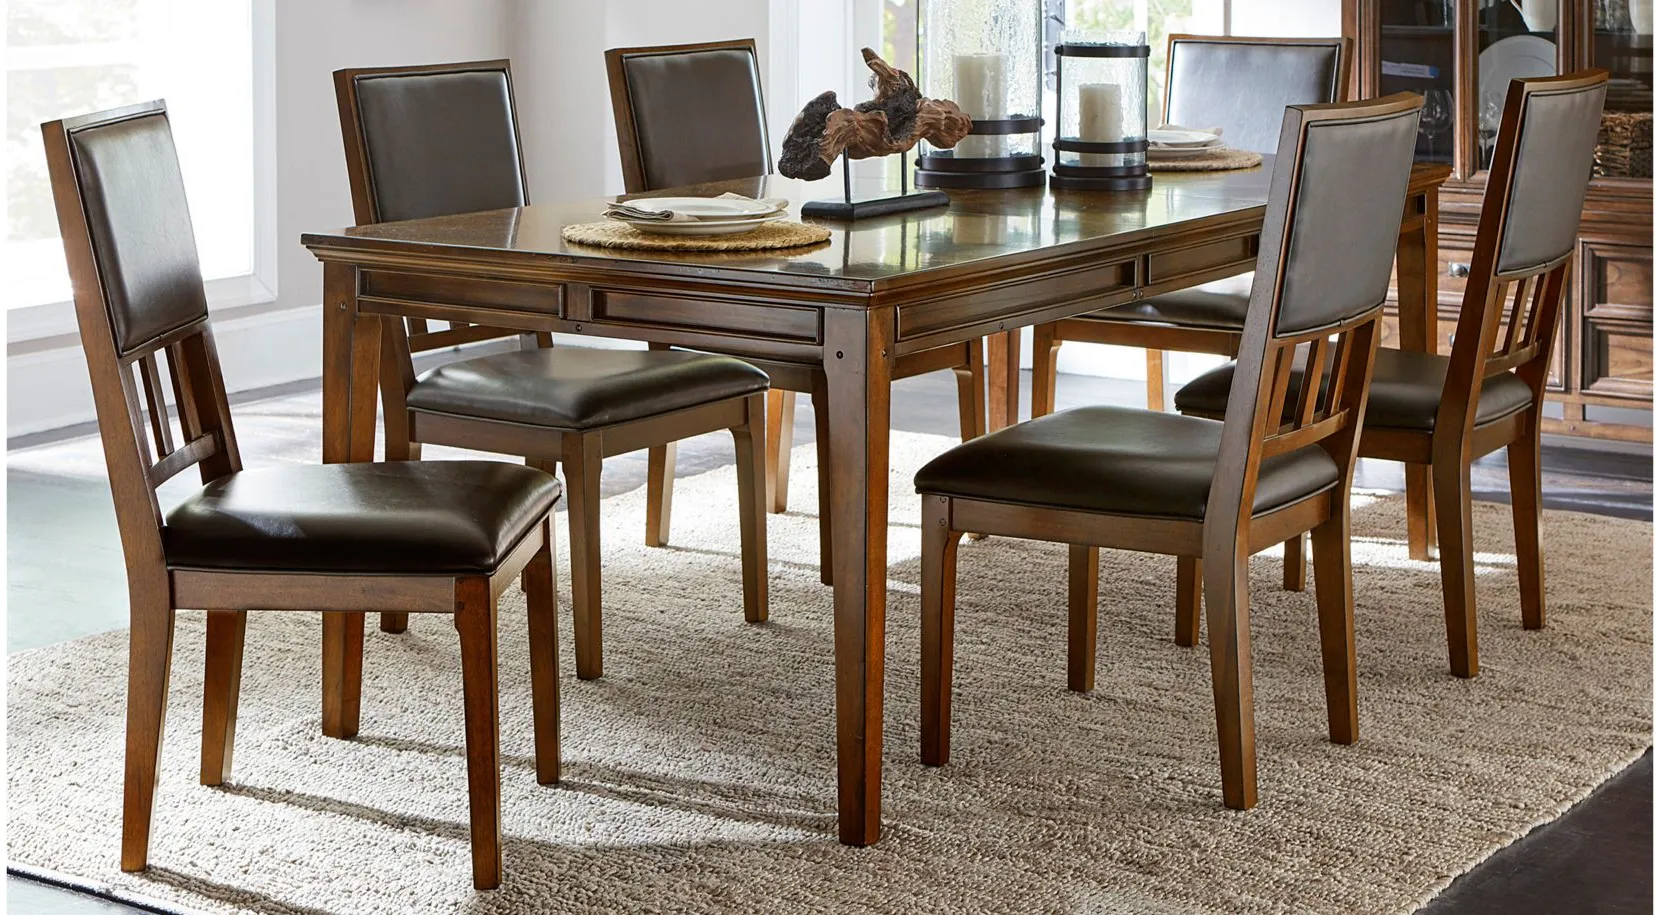 Tamsin 7-pc. Dining Set in Brown cherry by Homelegance